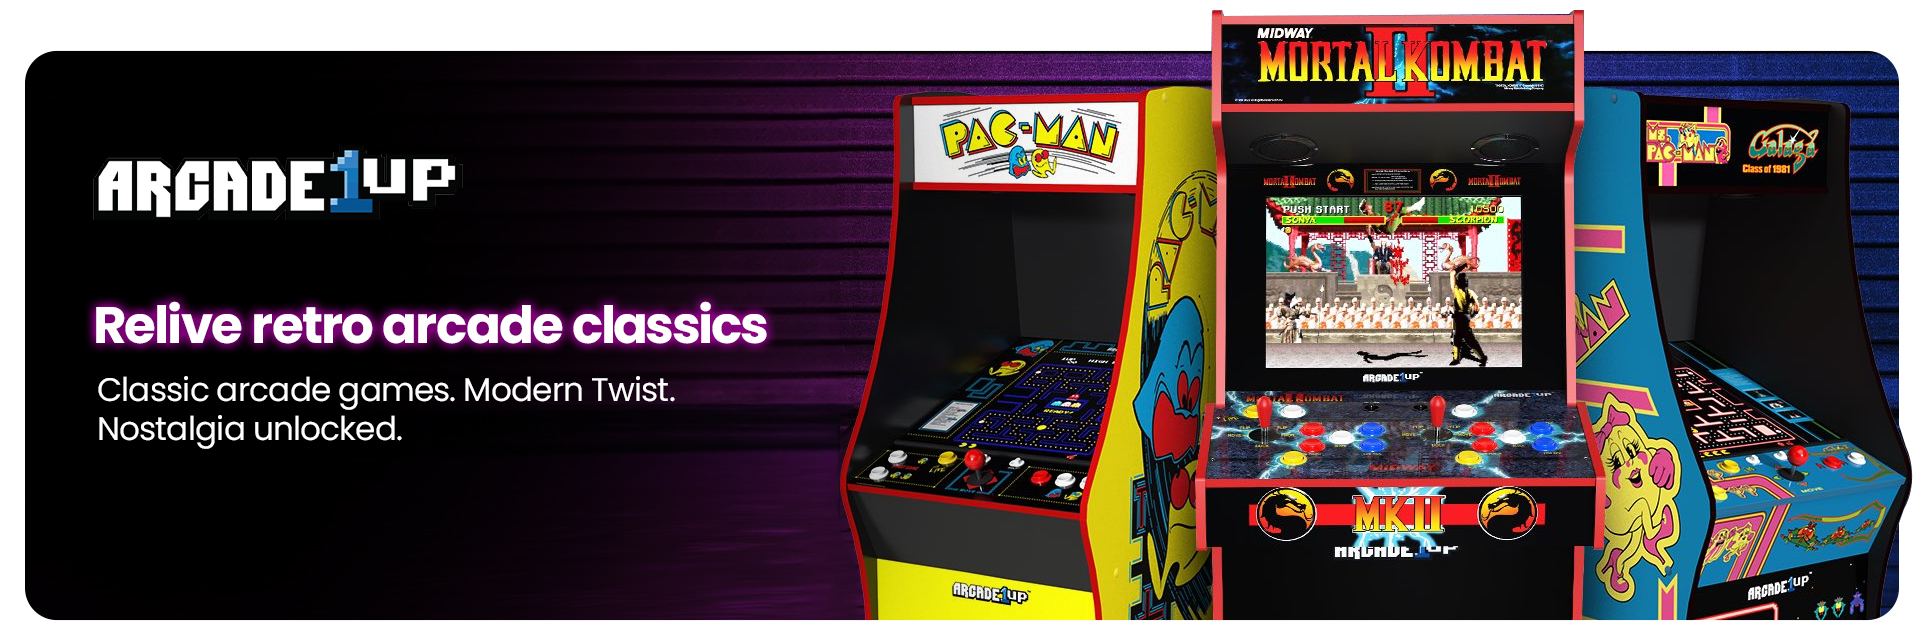 Arcade1up Landing Page 12.20.23banner4